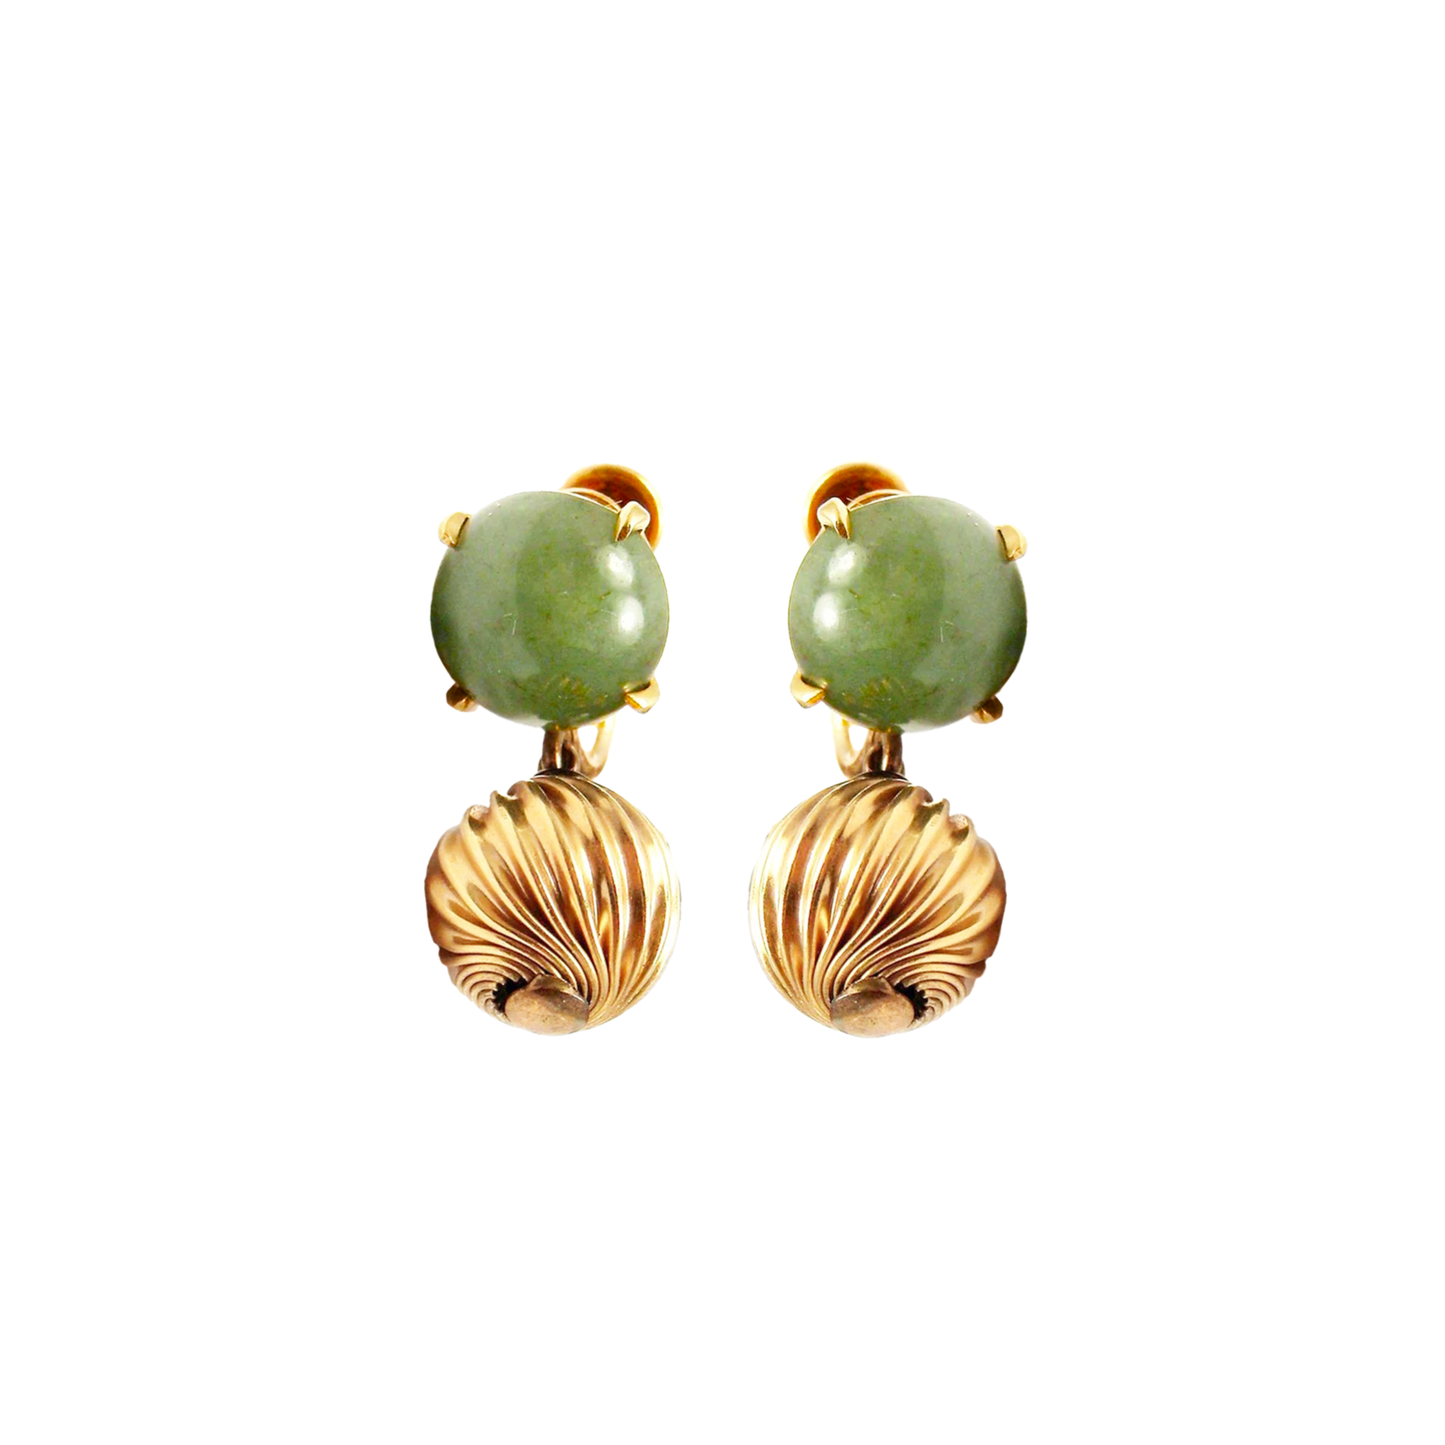 1980s 14KT Yellow Gold Jade Earrings front